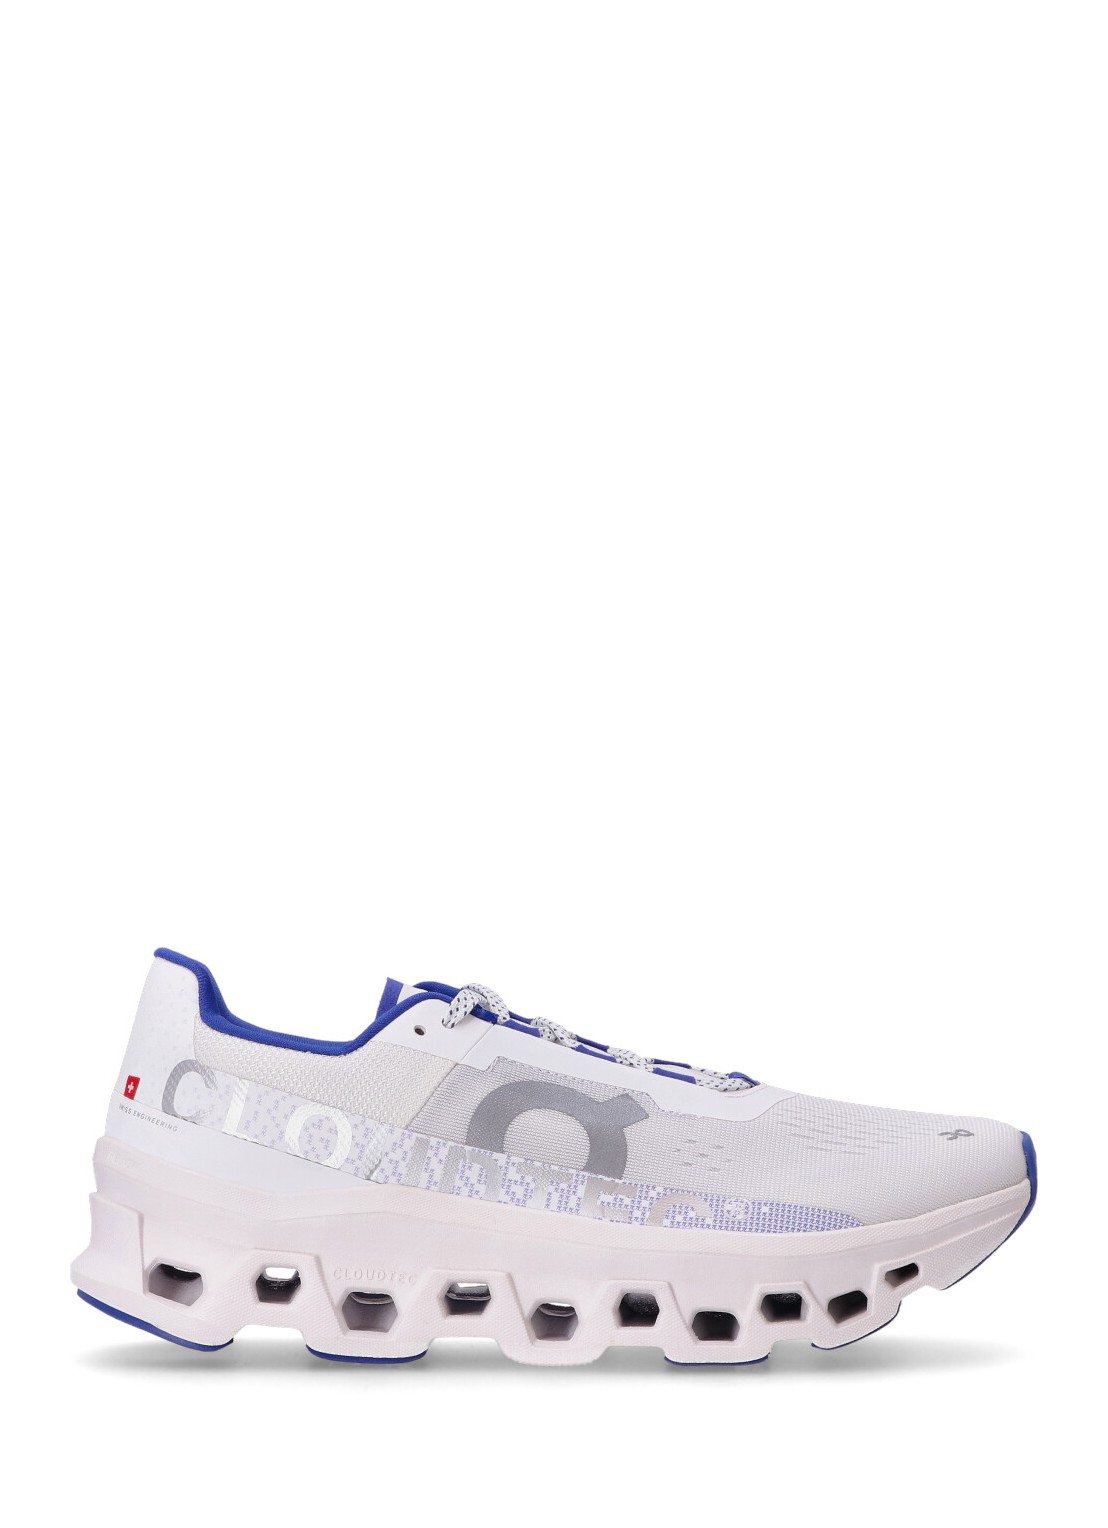 Sneaker on running sneaker man cloudmonster year of the dragon 3me10460629 white talla blanco
 